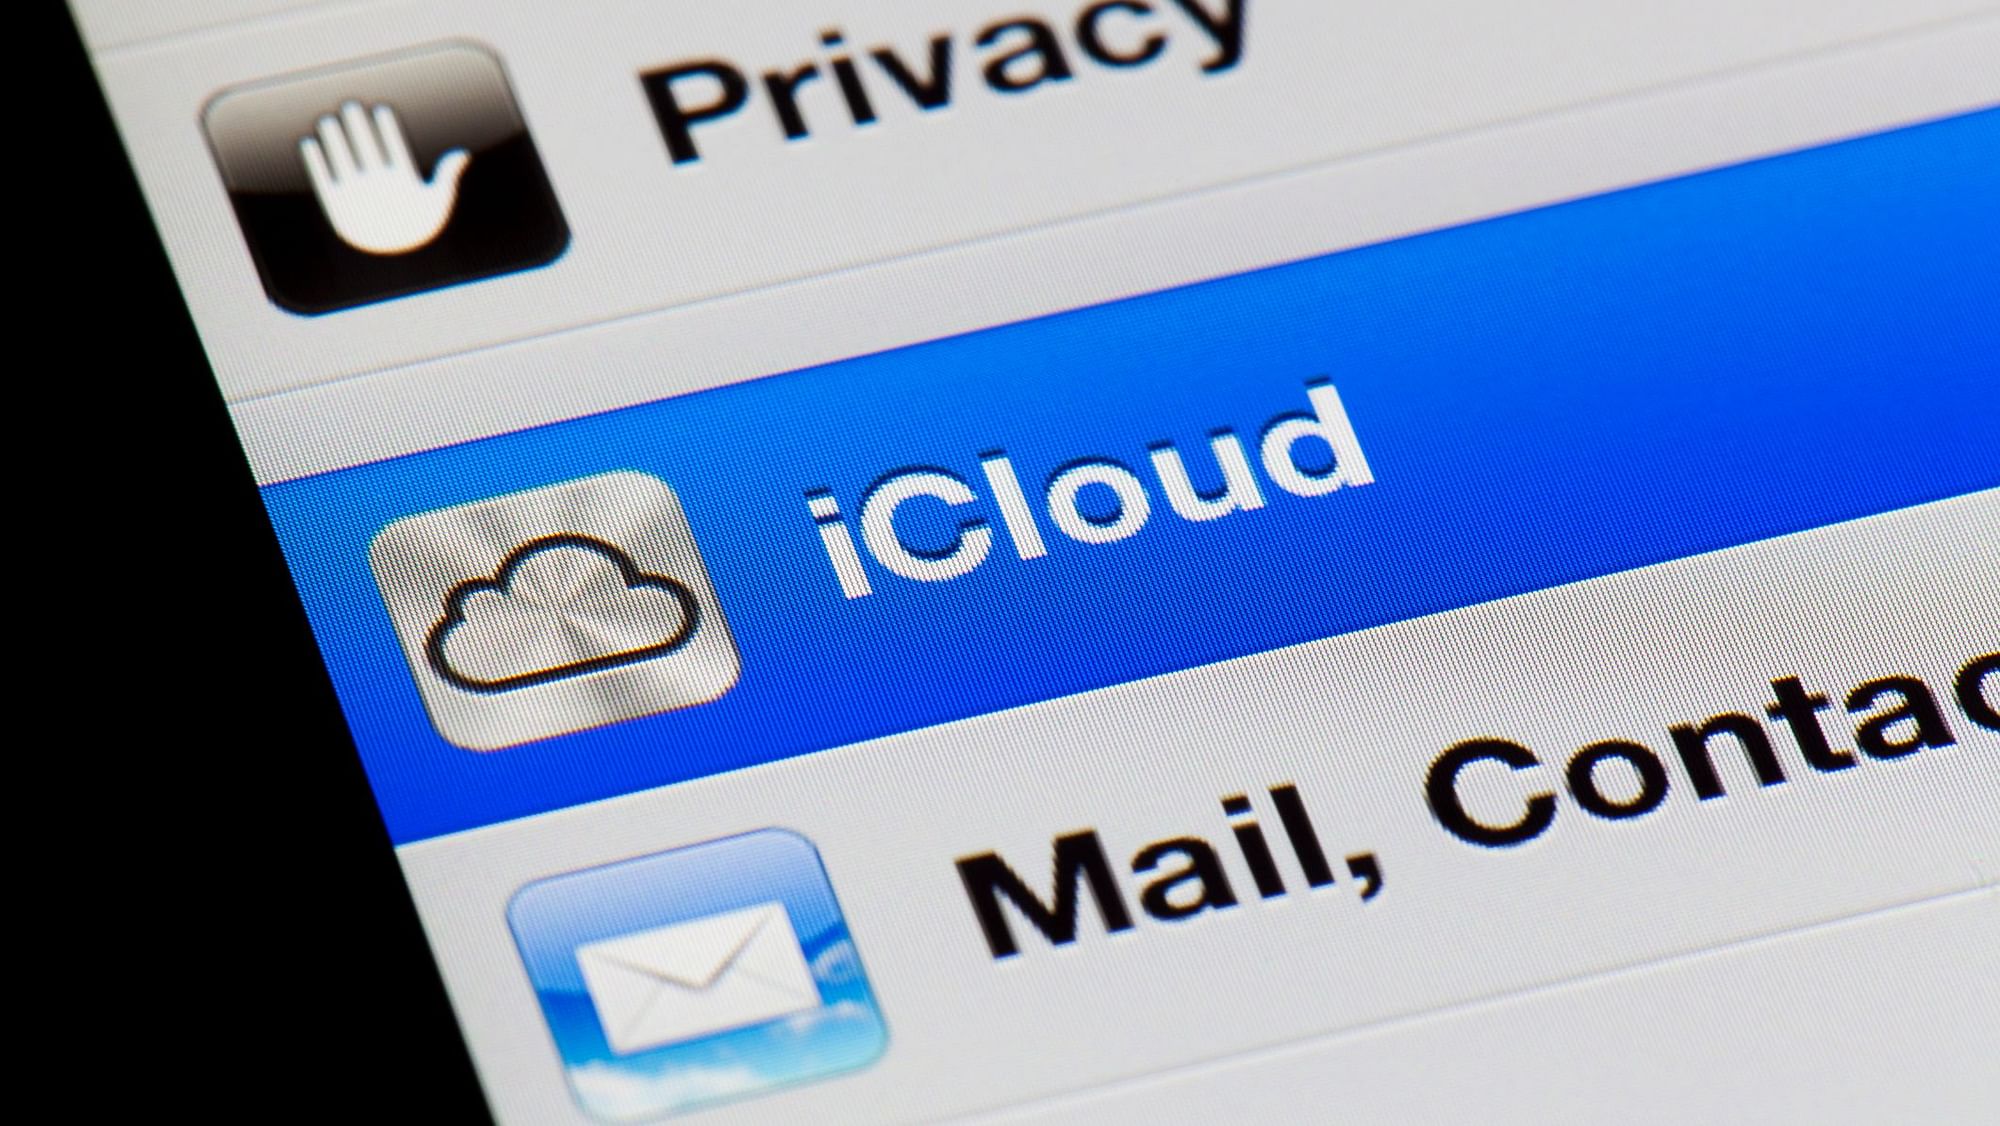 Apple’s cloud storage service keeps backups of your data.